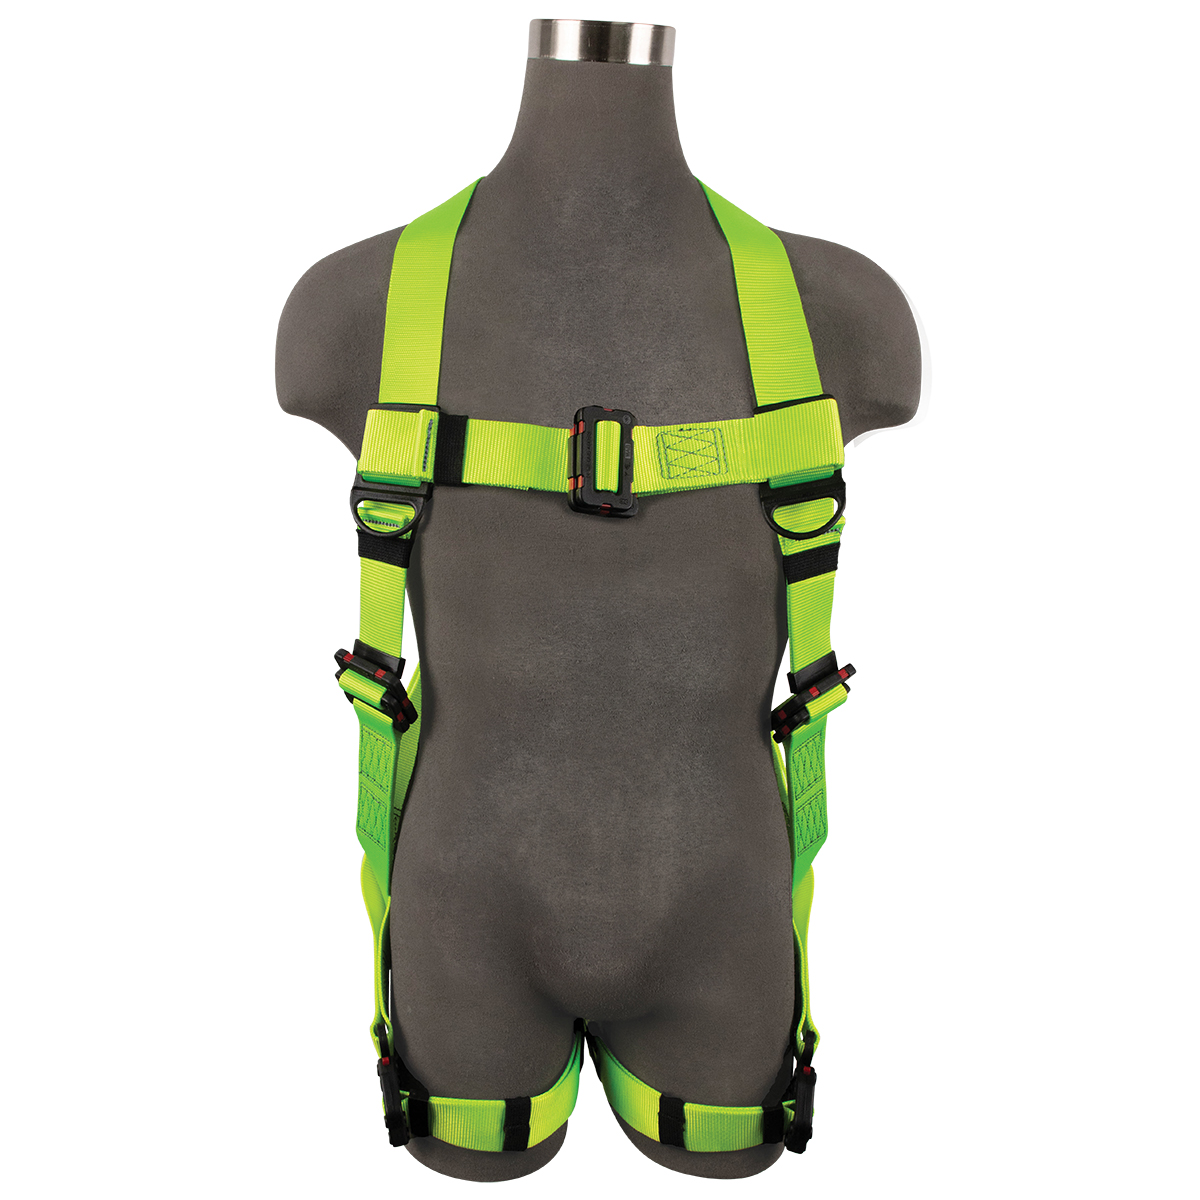 SAFEWAZE PRO+ Arc Flash Dielectric Harness with Pass through Dielectric on Chest and Quick-Connect Legs: X-Small